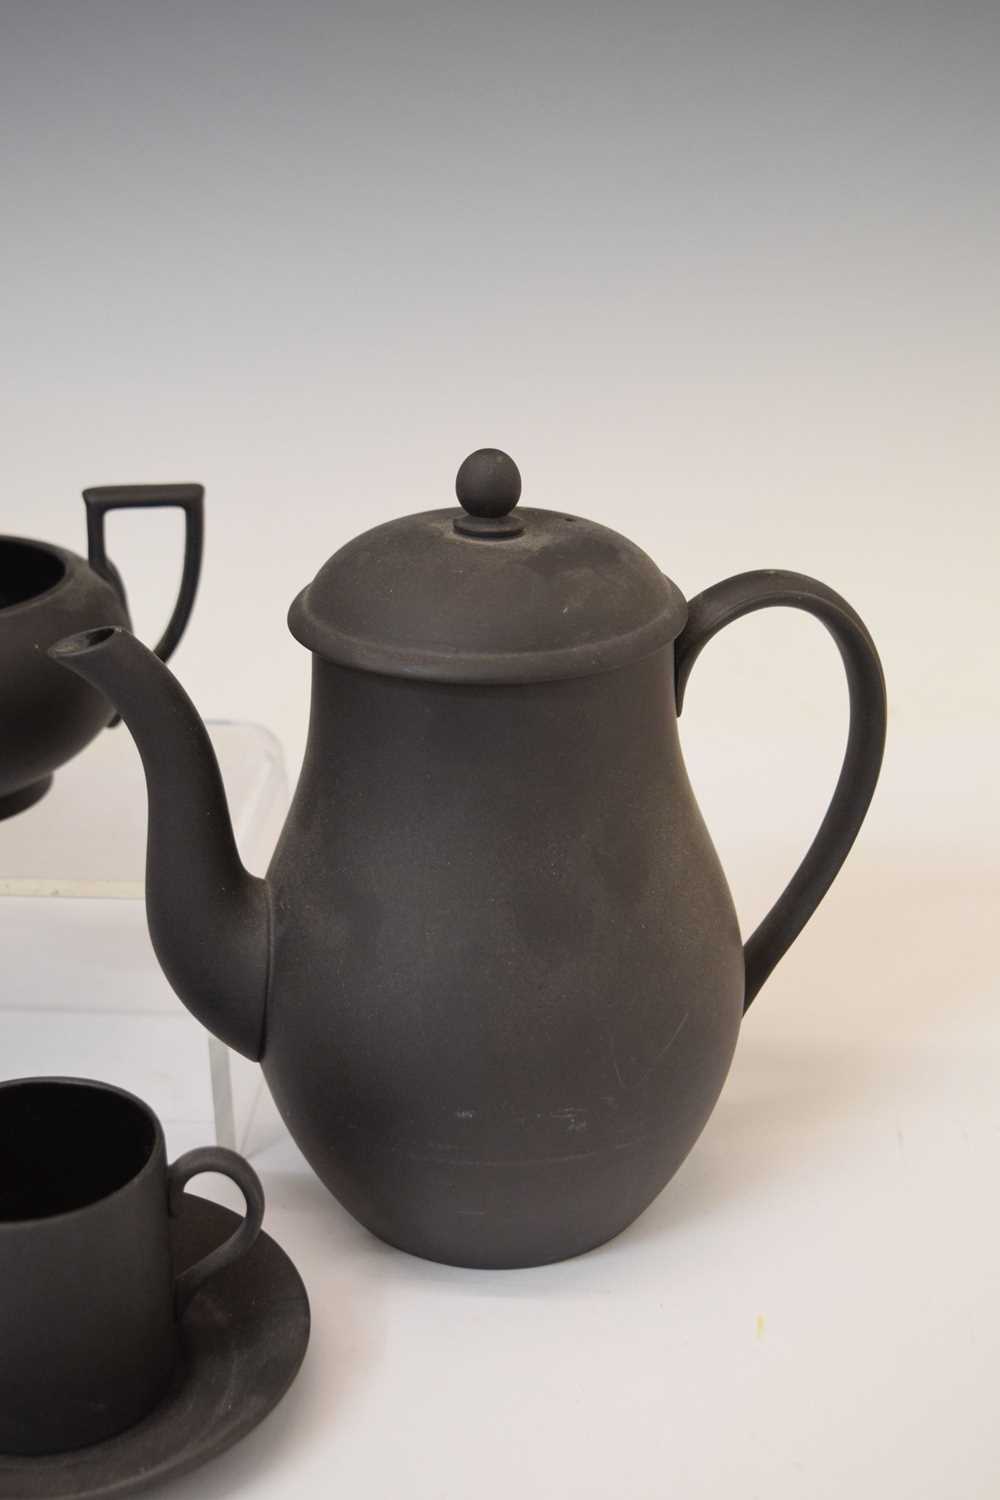 Wedgwood - Black basalt coffee set for five persons - Image 6 of 8